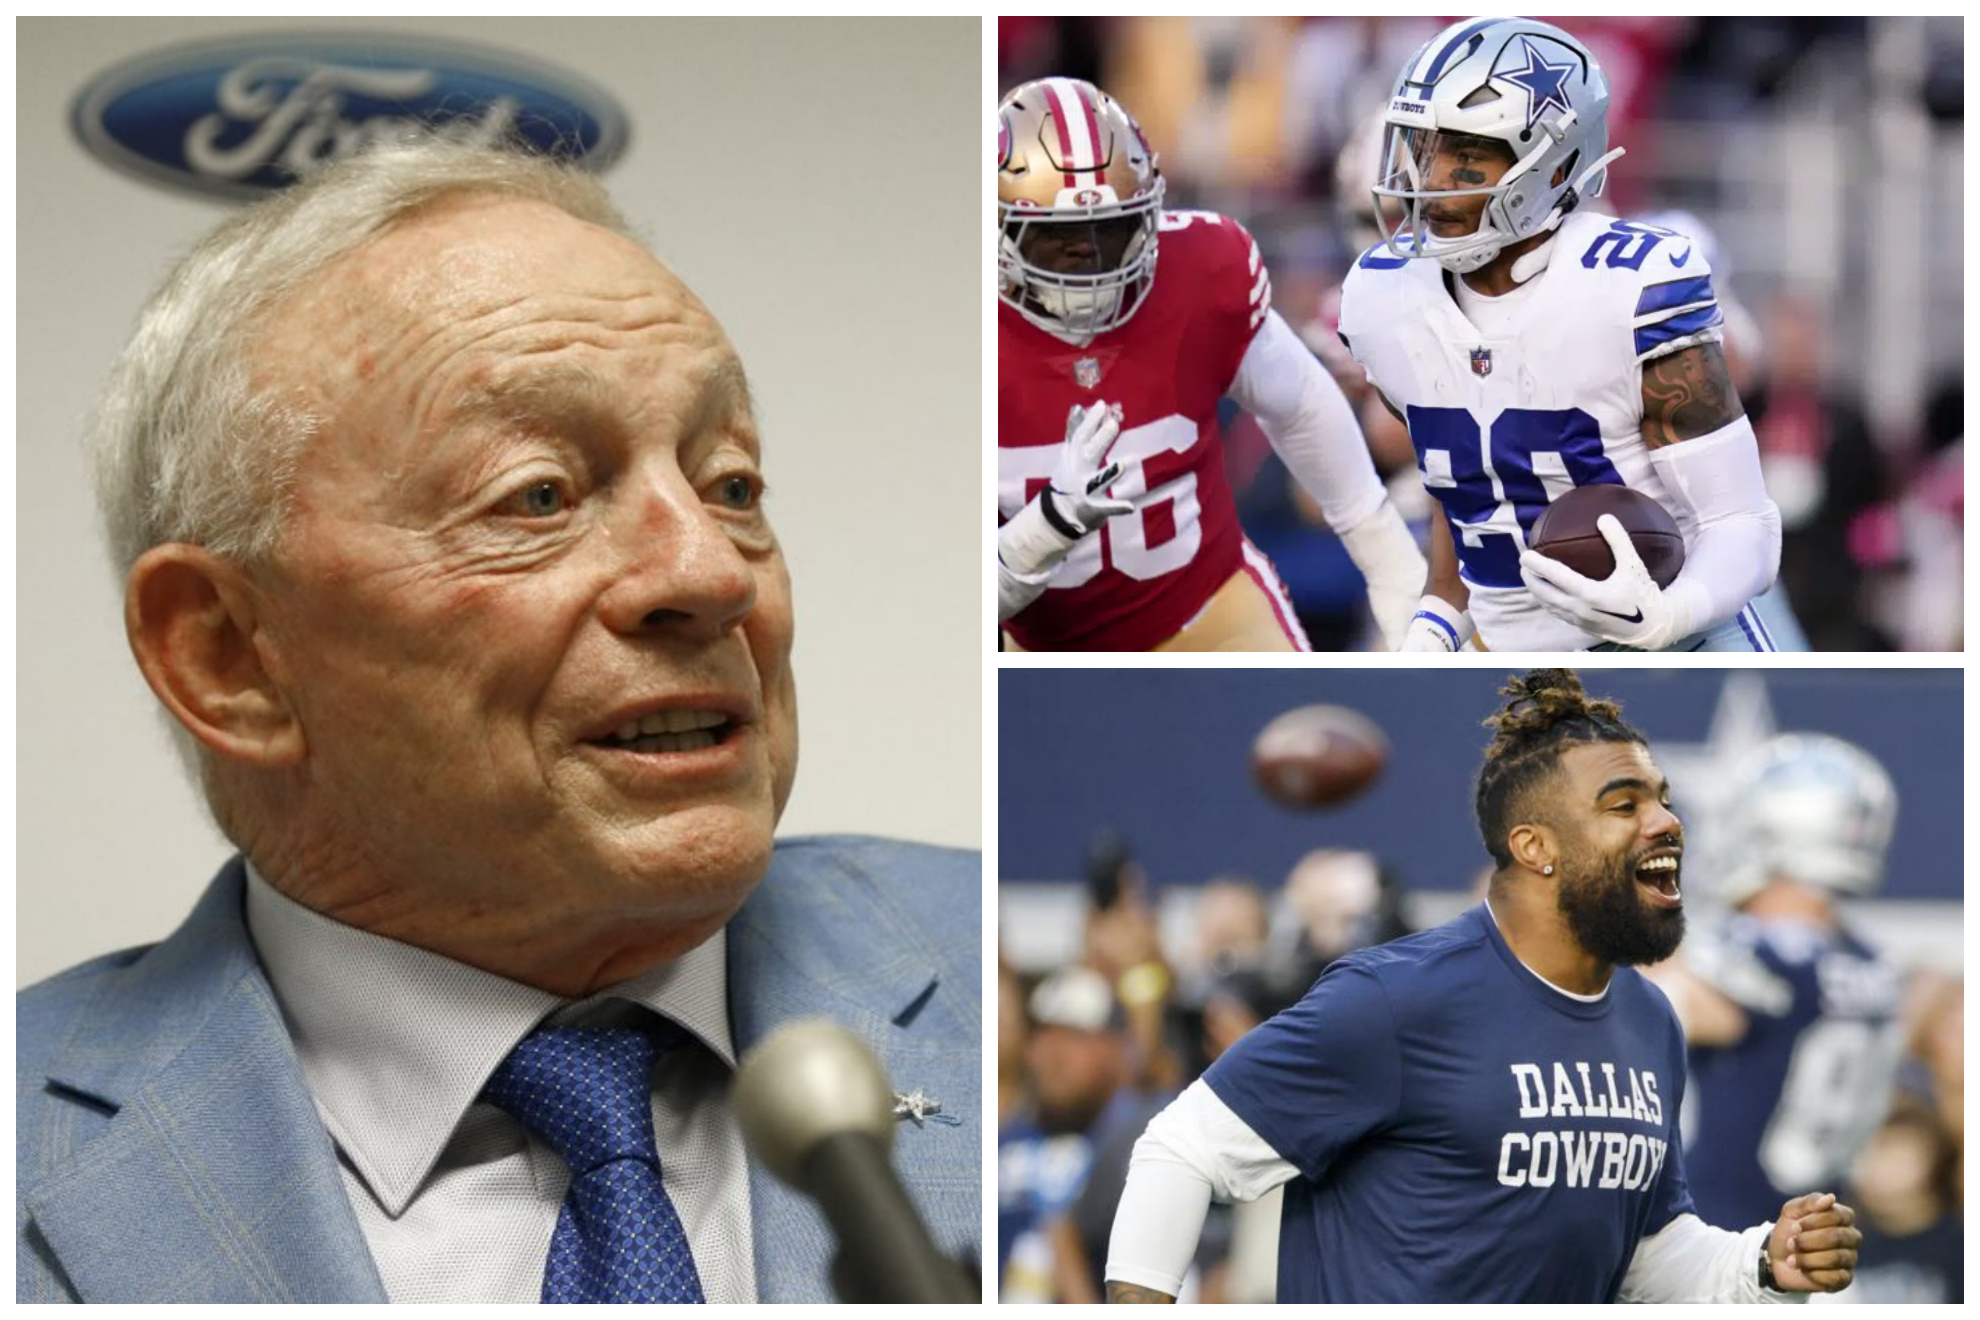 Jerry Jones declined to comment as he says he is the middle of multiple contract negotiations.